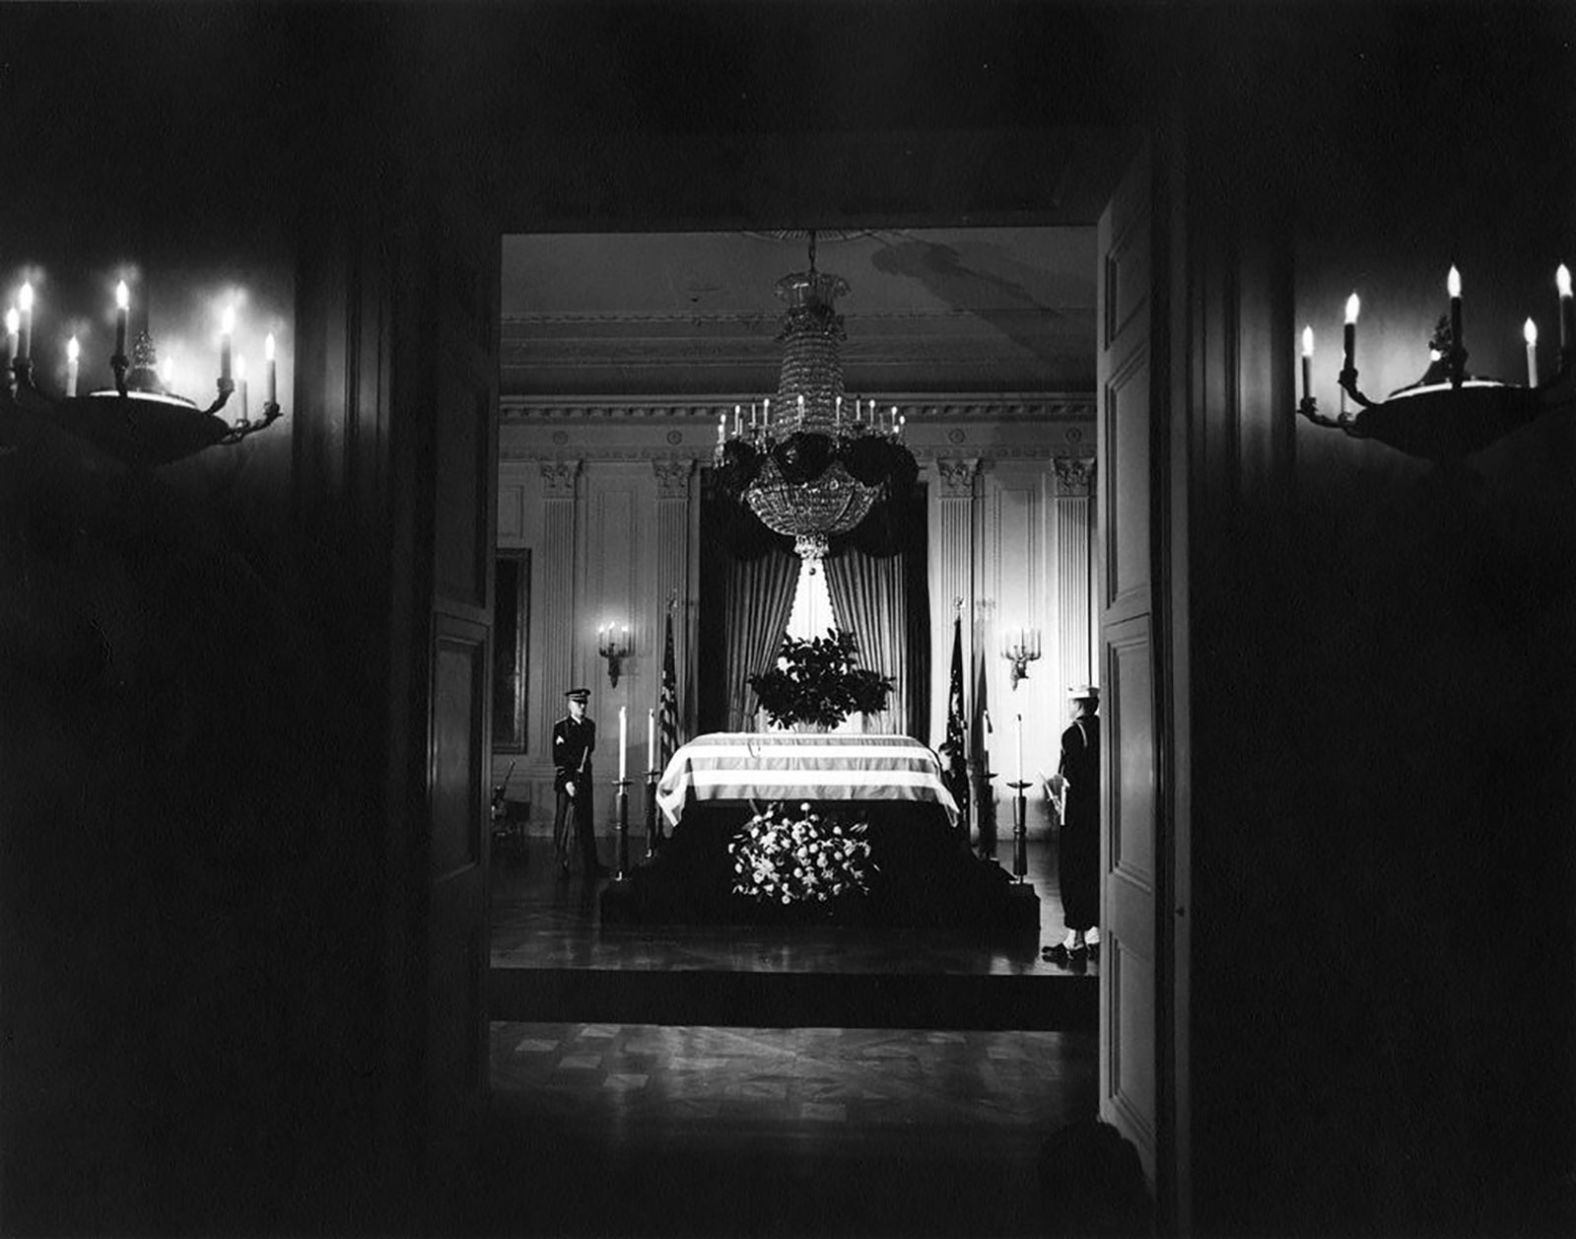 Kennedy's casket lies in state in the East Room of the White House on the day after his assassination. He was 46 years old.